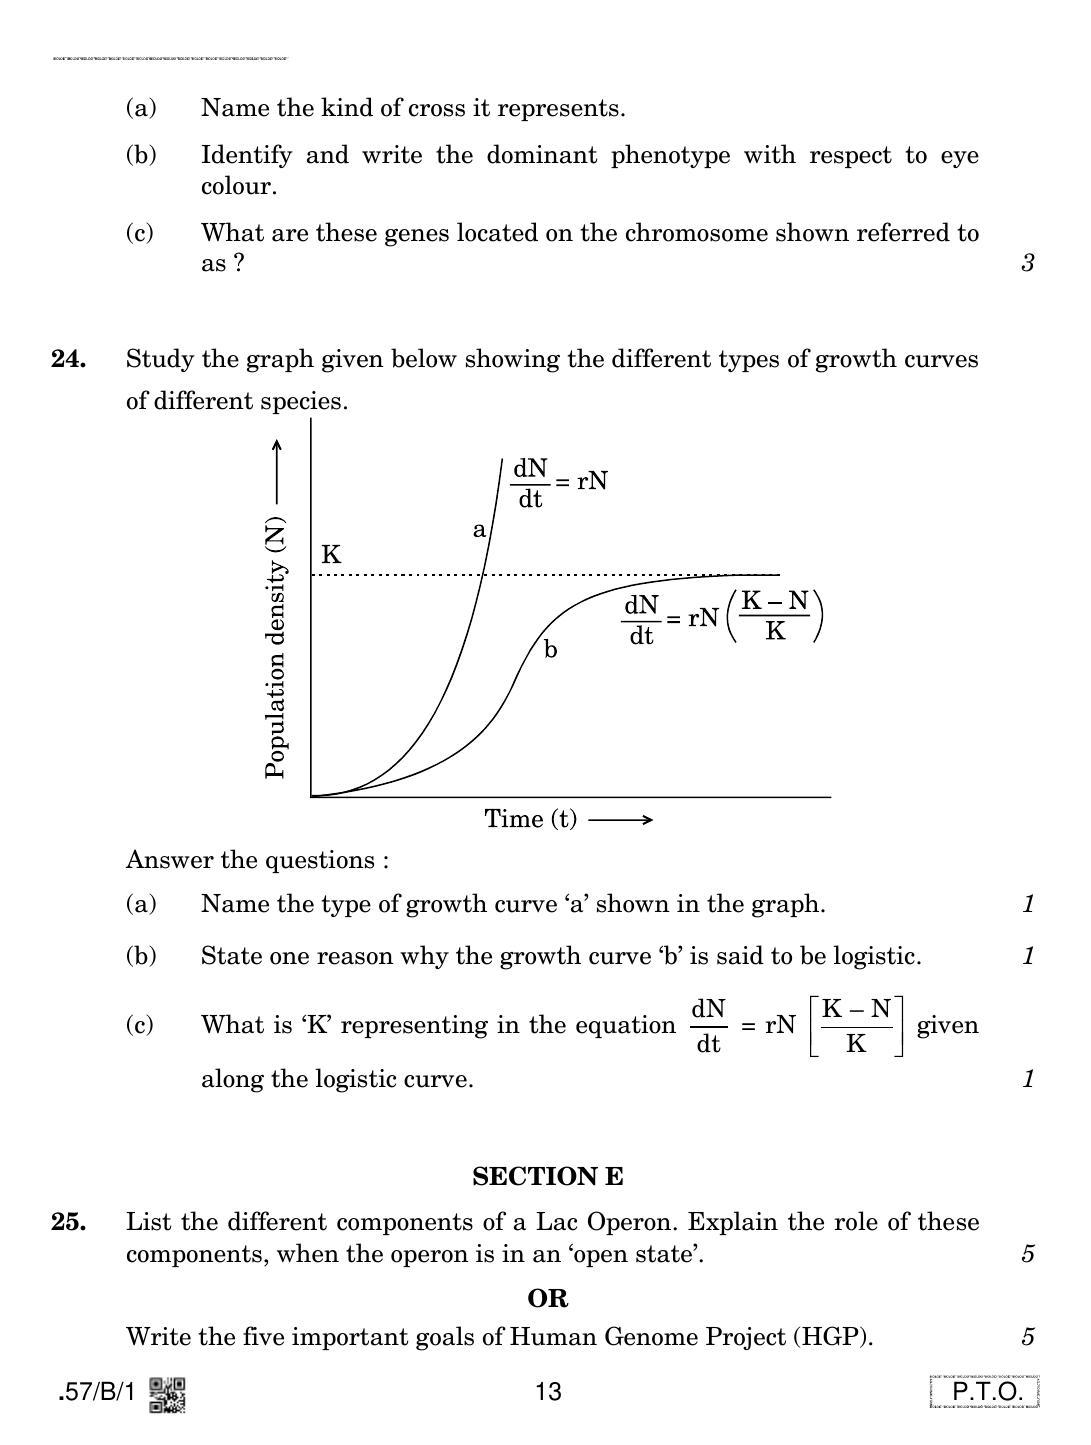 CBSE Class 12 57-C-1 - Biology 2020 Compartment Question Paper - Page 13